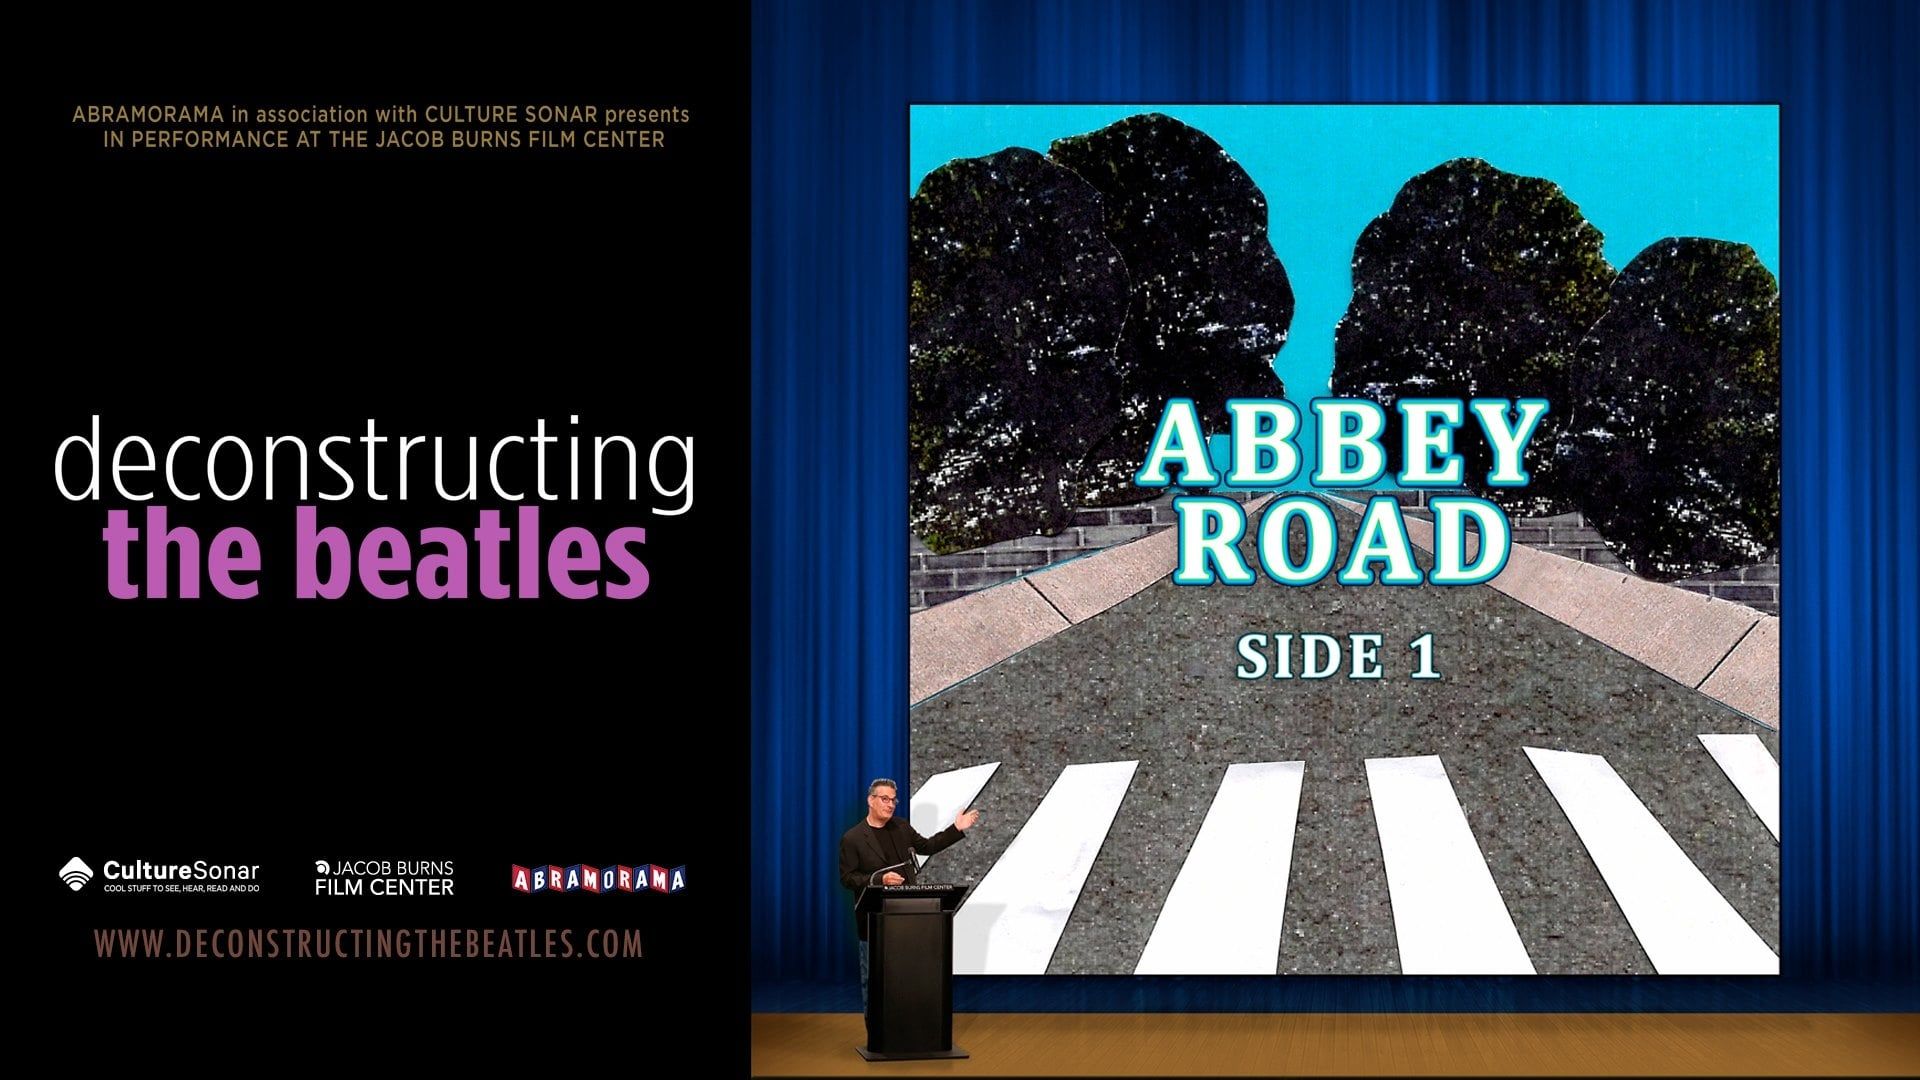 Deconstructing the Beatles' Abbey Road: Side 1 background